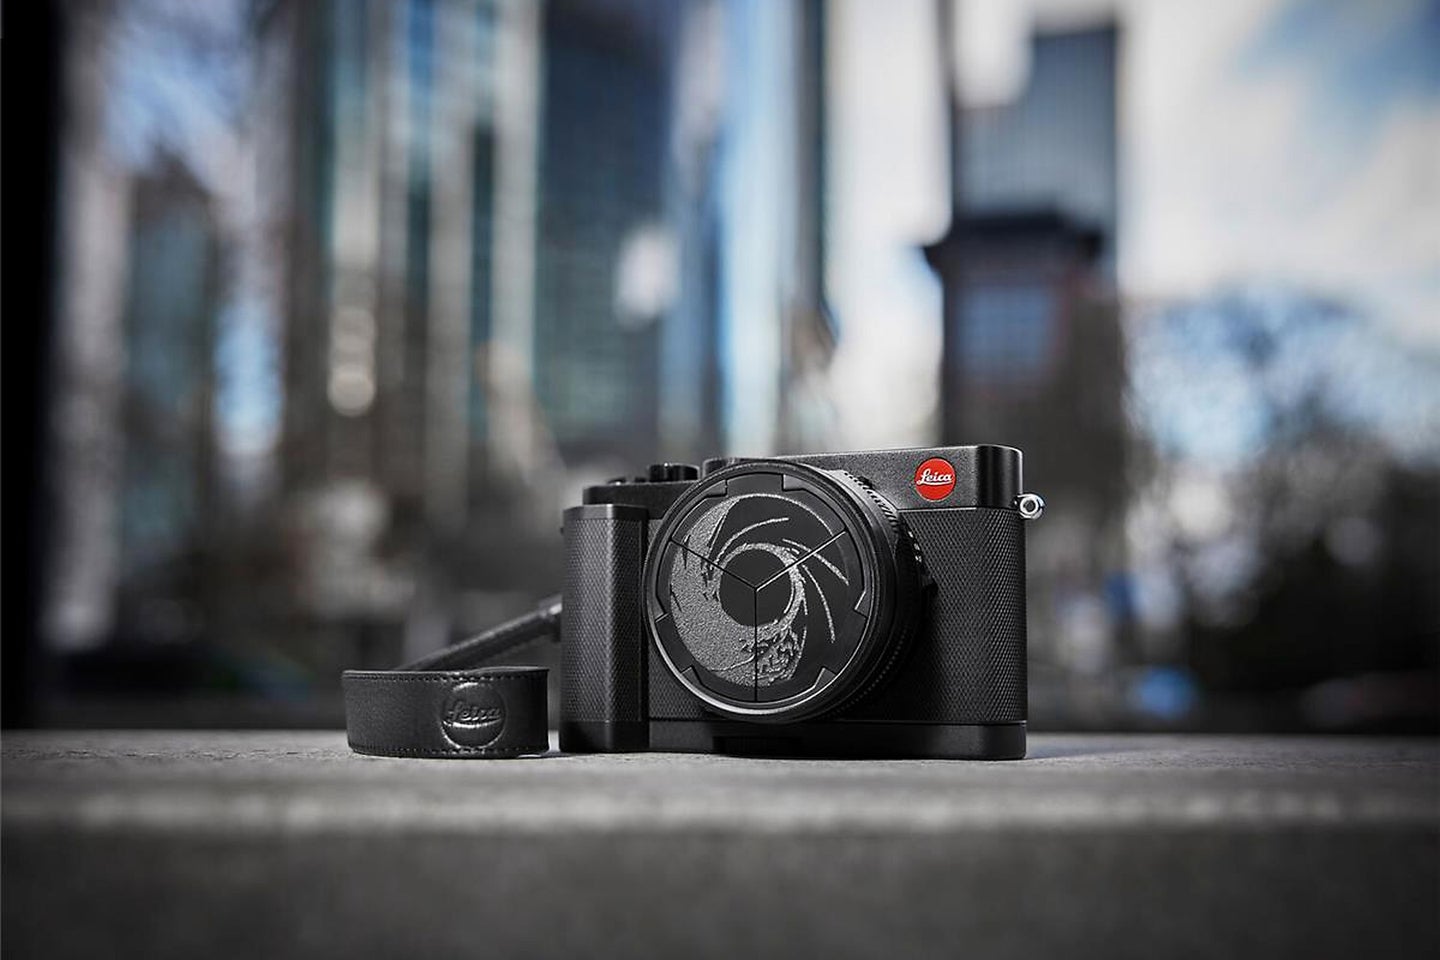 The Leica D-Lux 7 007 Edition in a cityscape